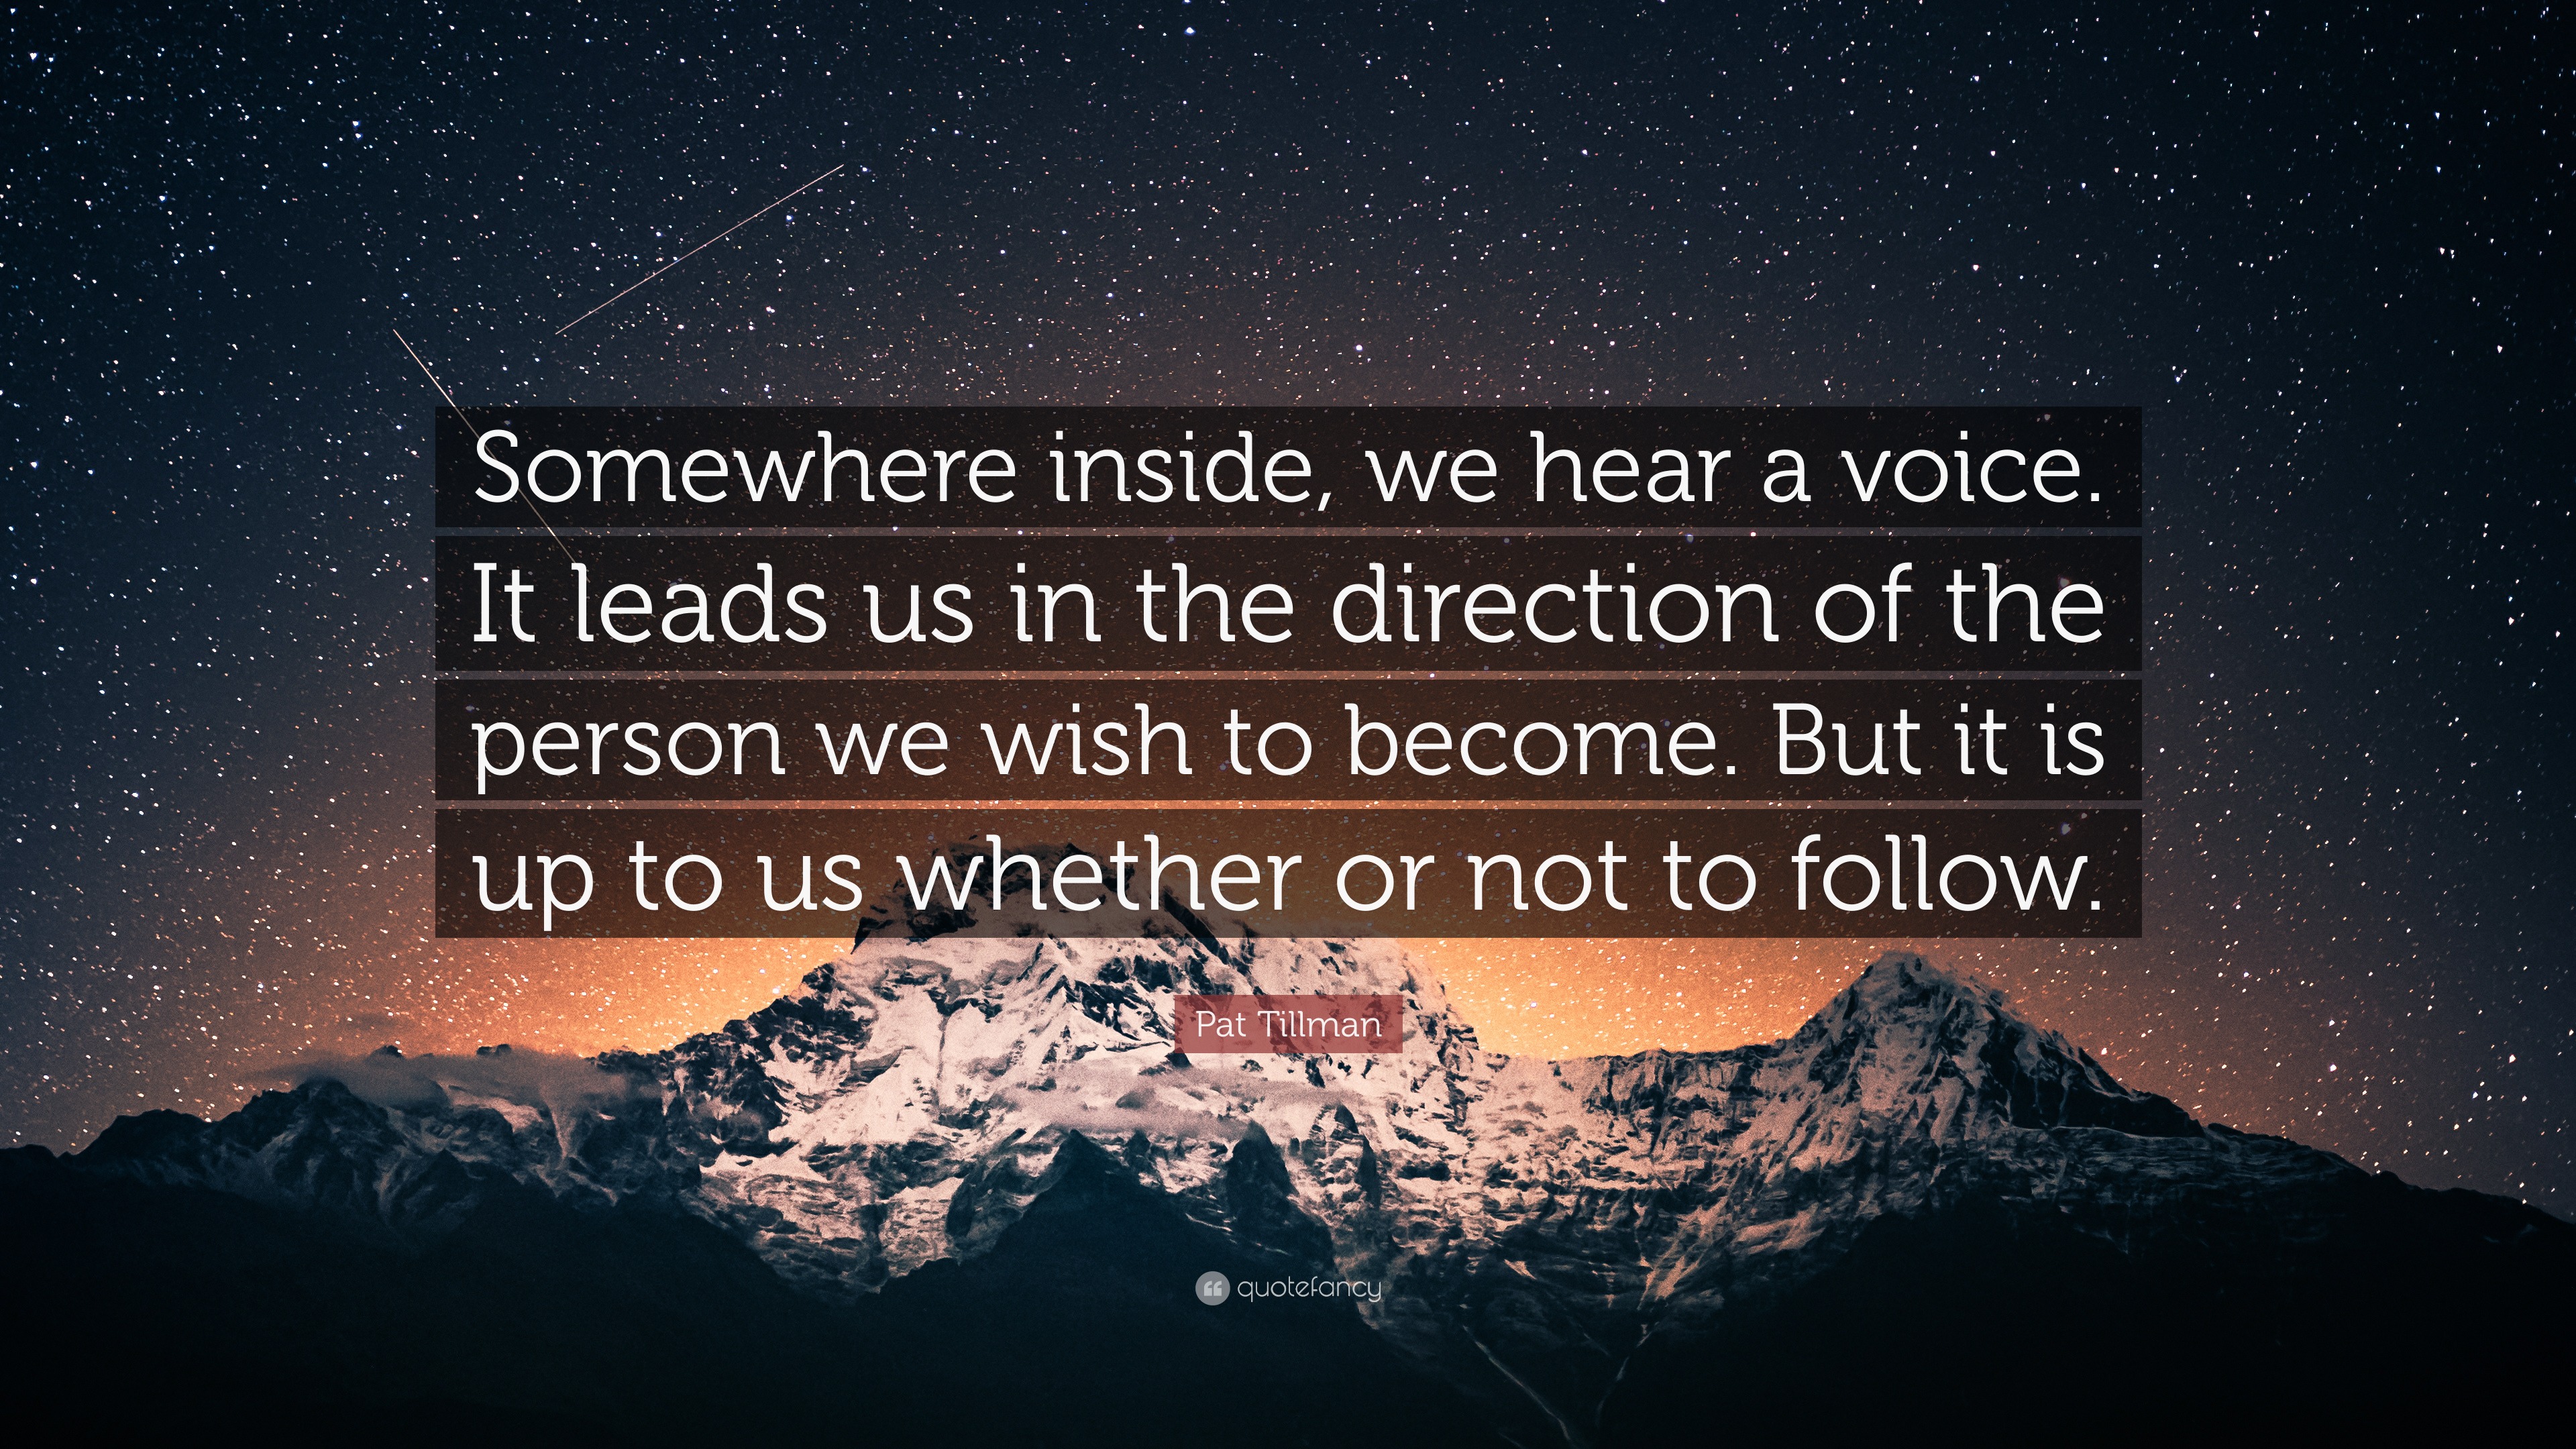 Pat Tillman Quote: “Somewhere inside, we hear a voice. It leads us in